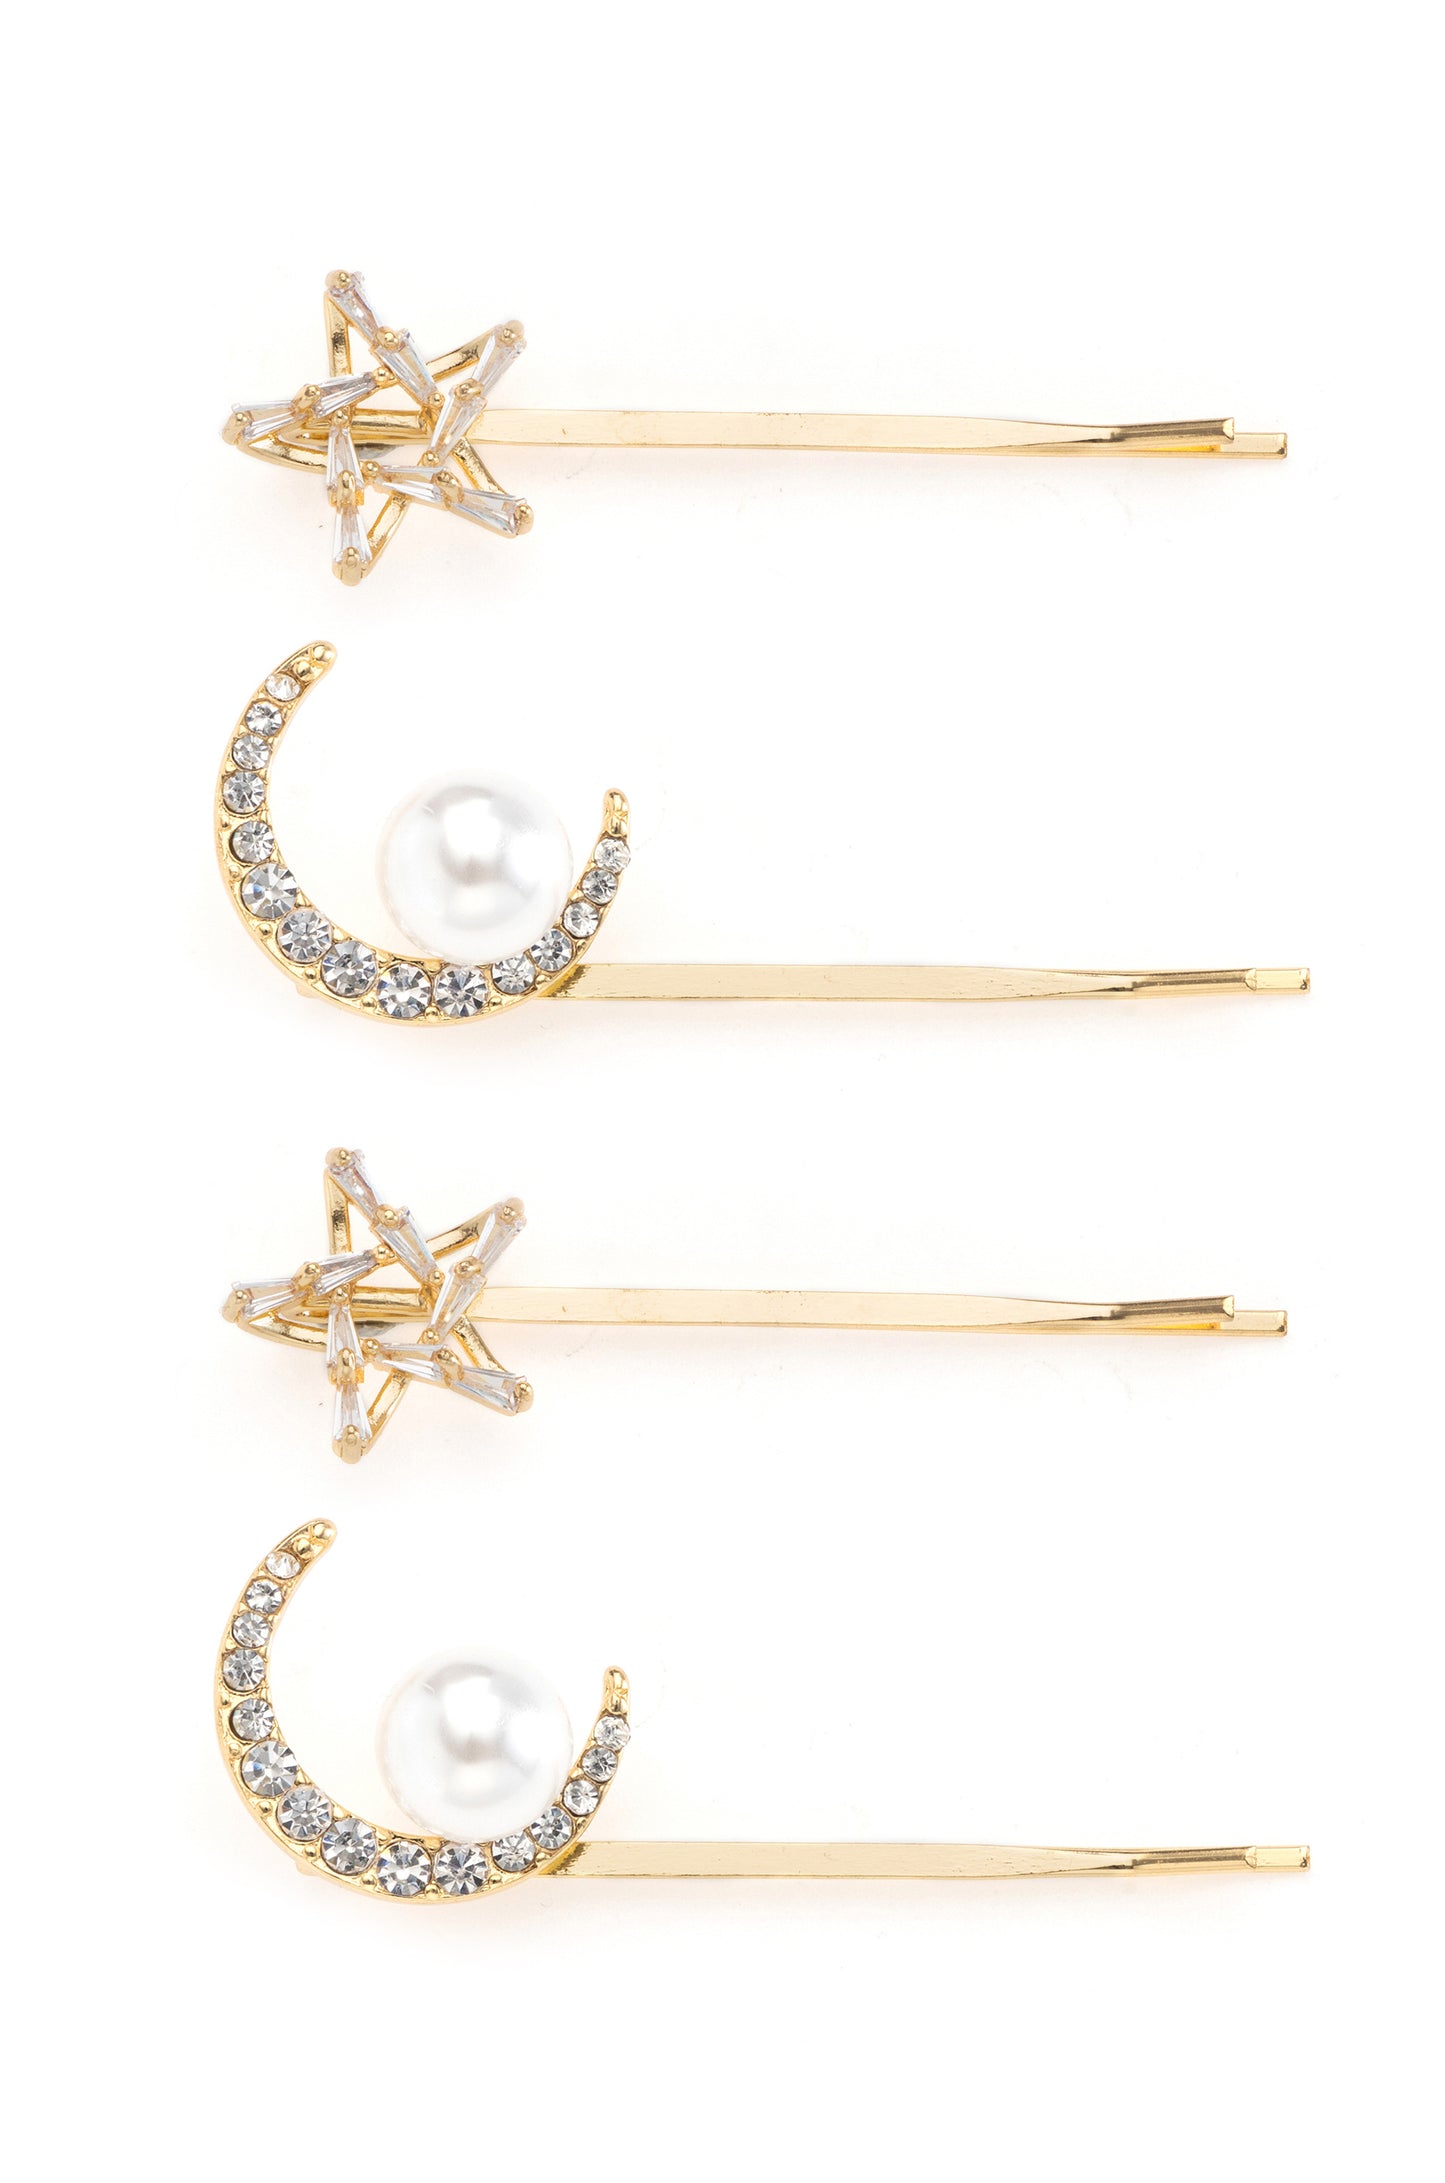 Spell Casting Crystal and Pearl Hair Pins on white background  